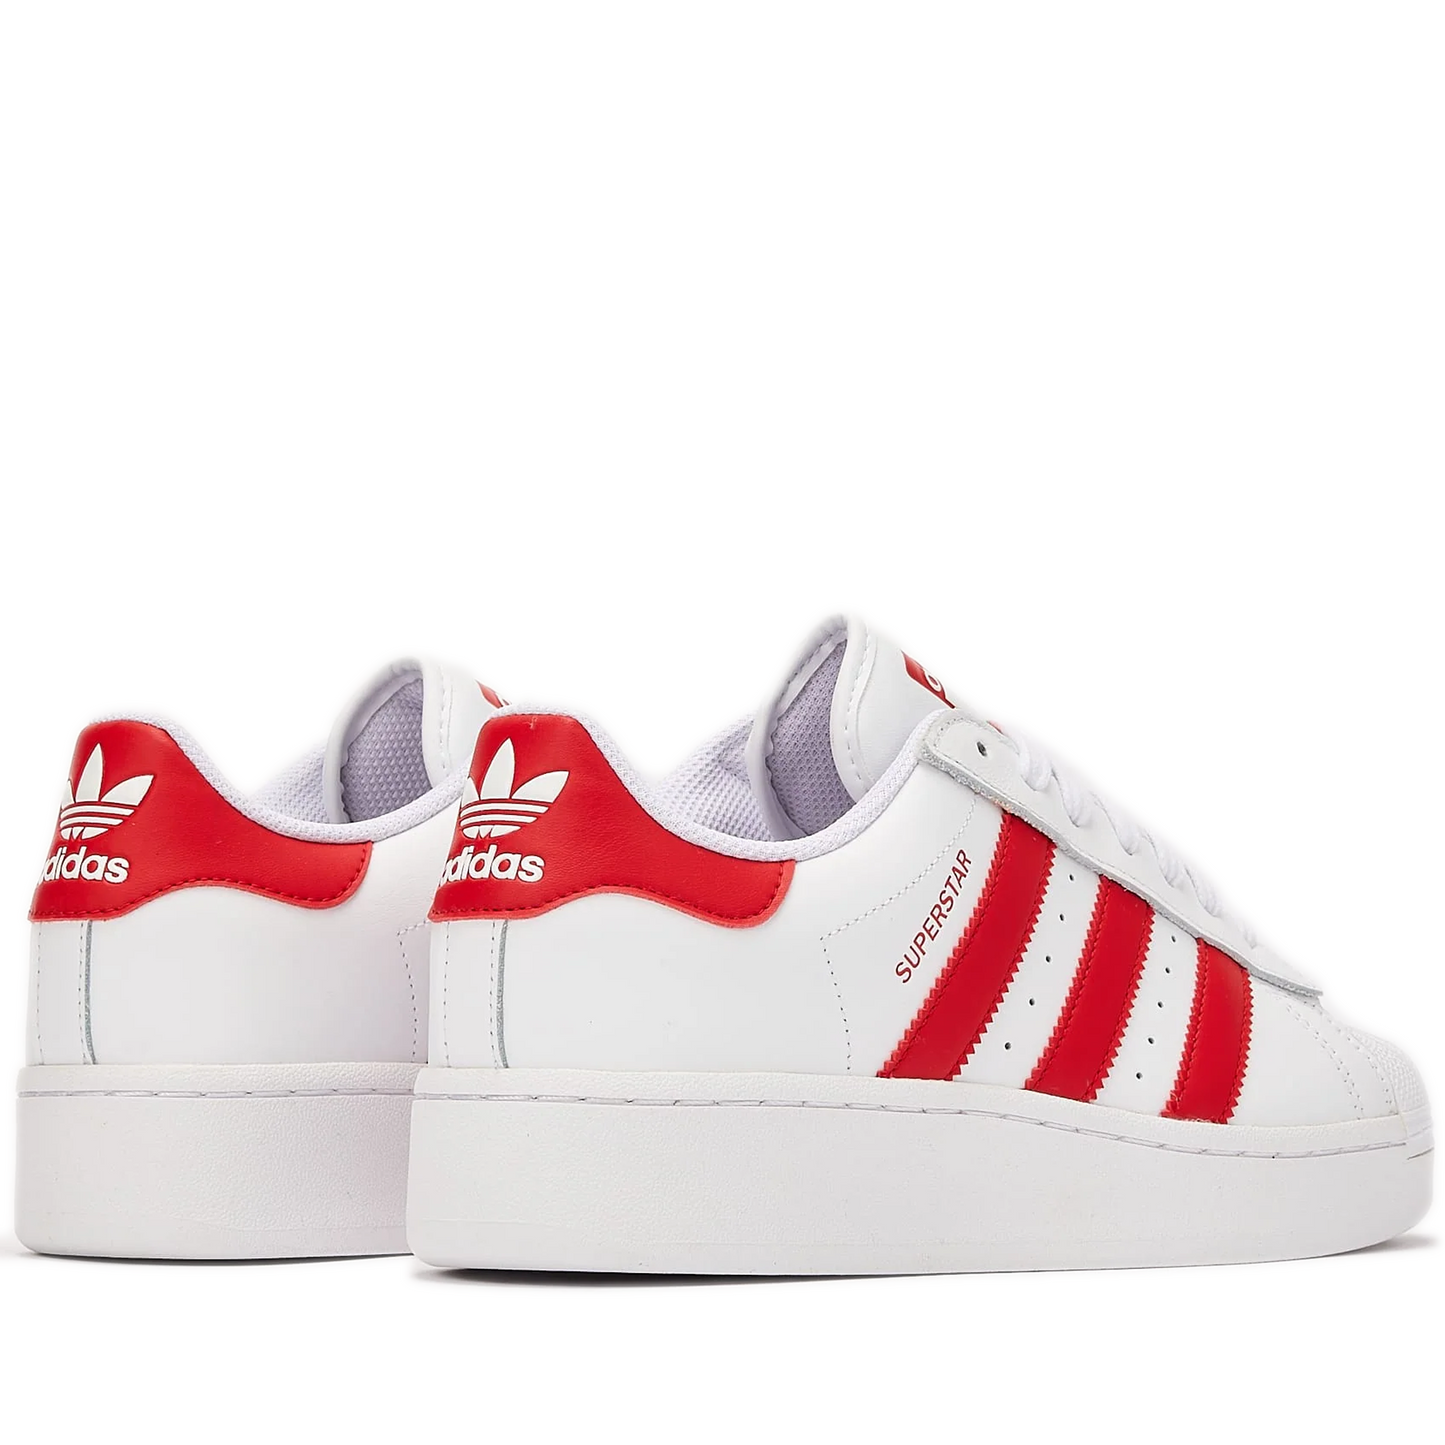 Men's Adidas Superstar XLG Shoes - White/ Red